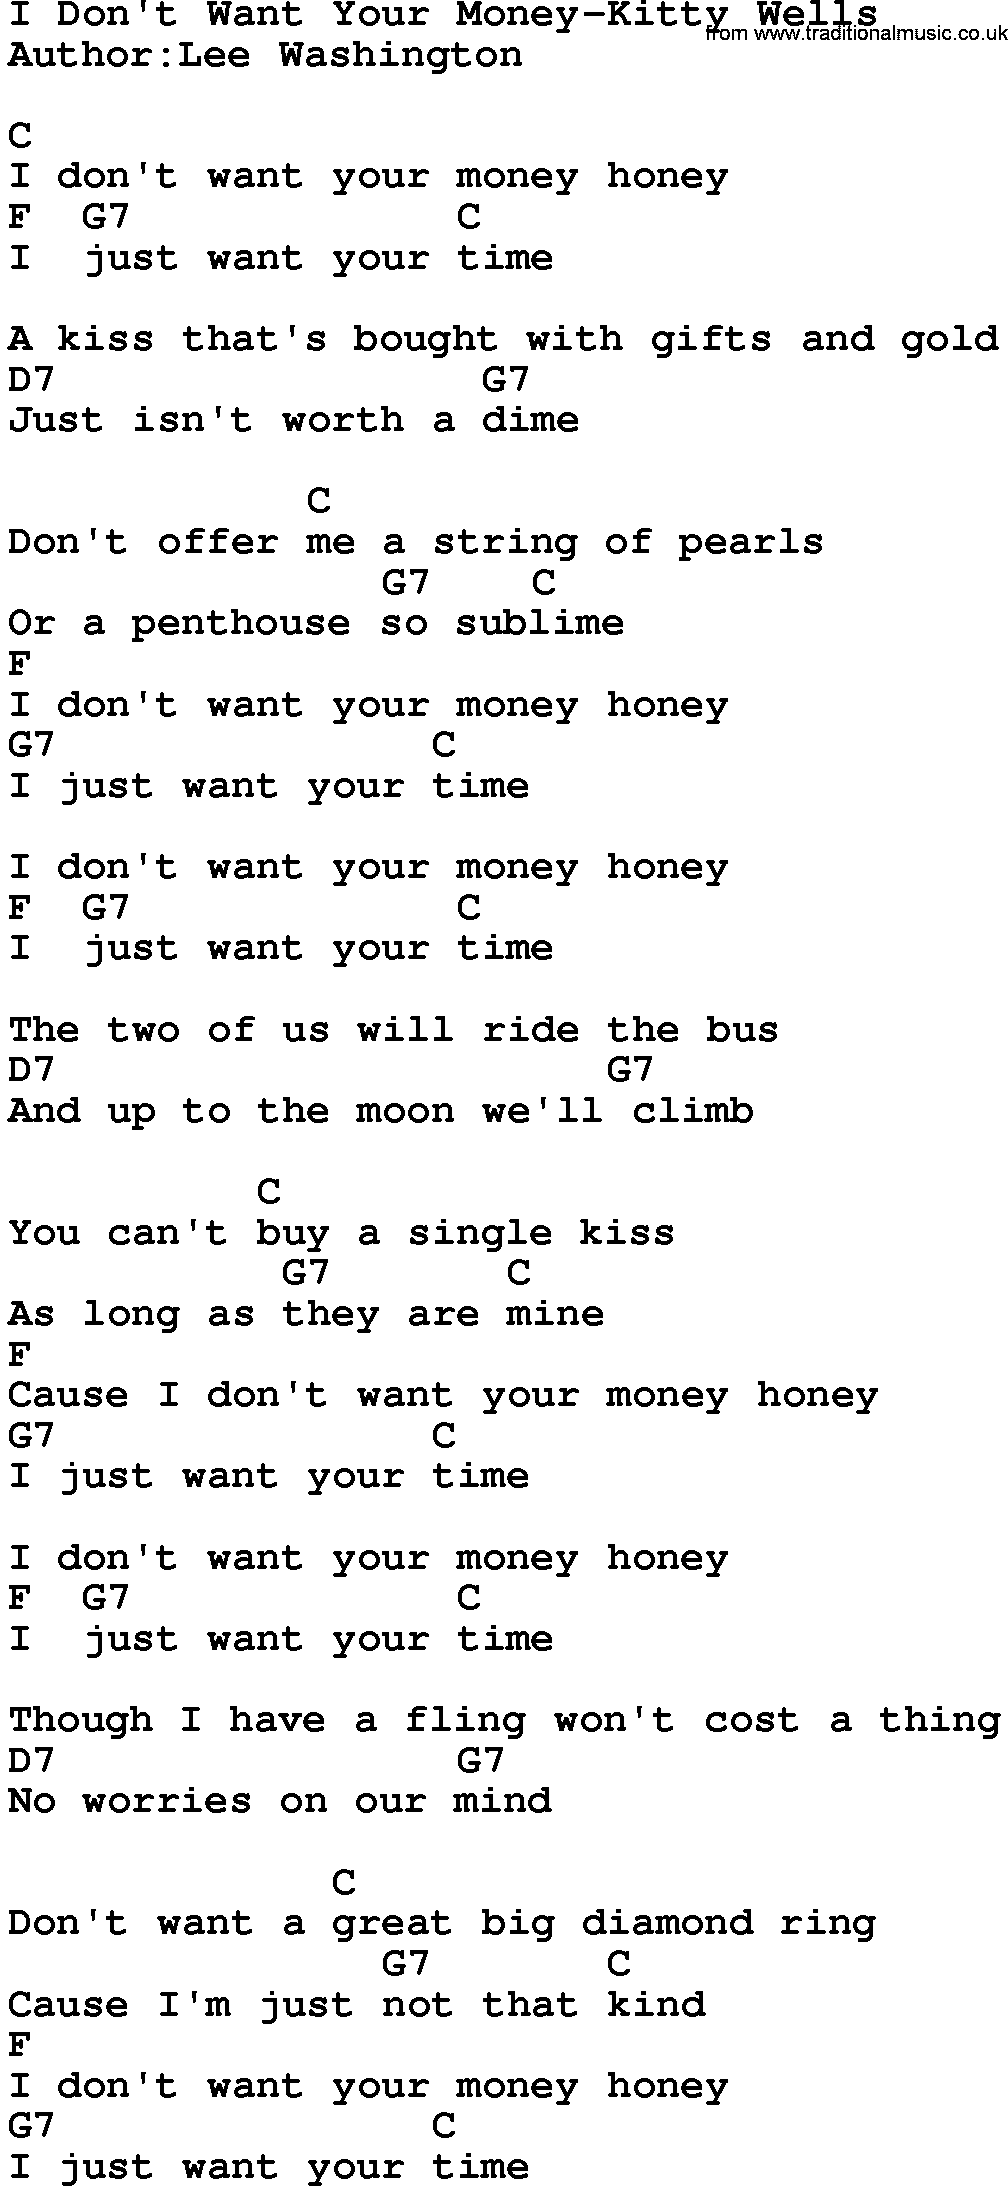 Country music song: I Don't Want Your Money-Kitty Wells lyrics and chords